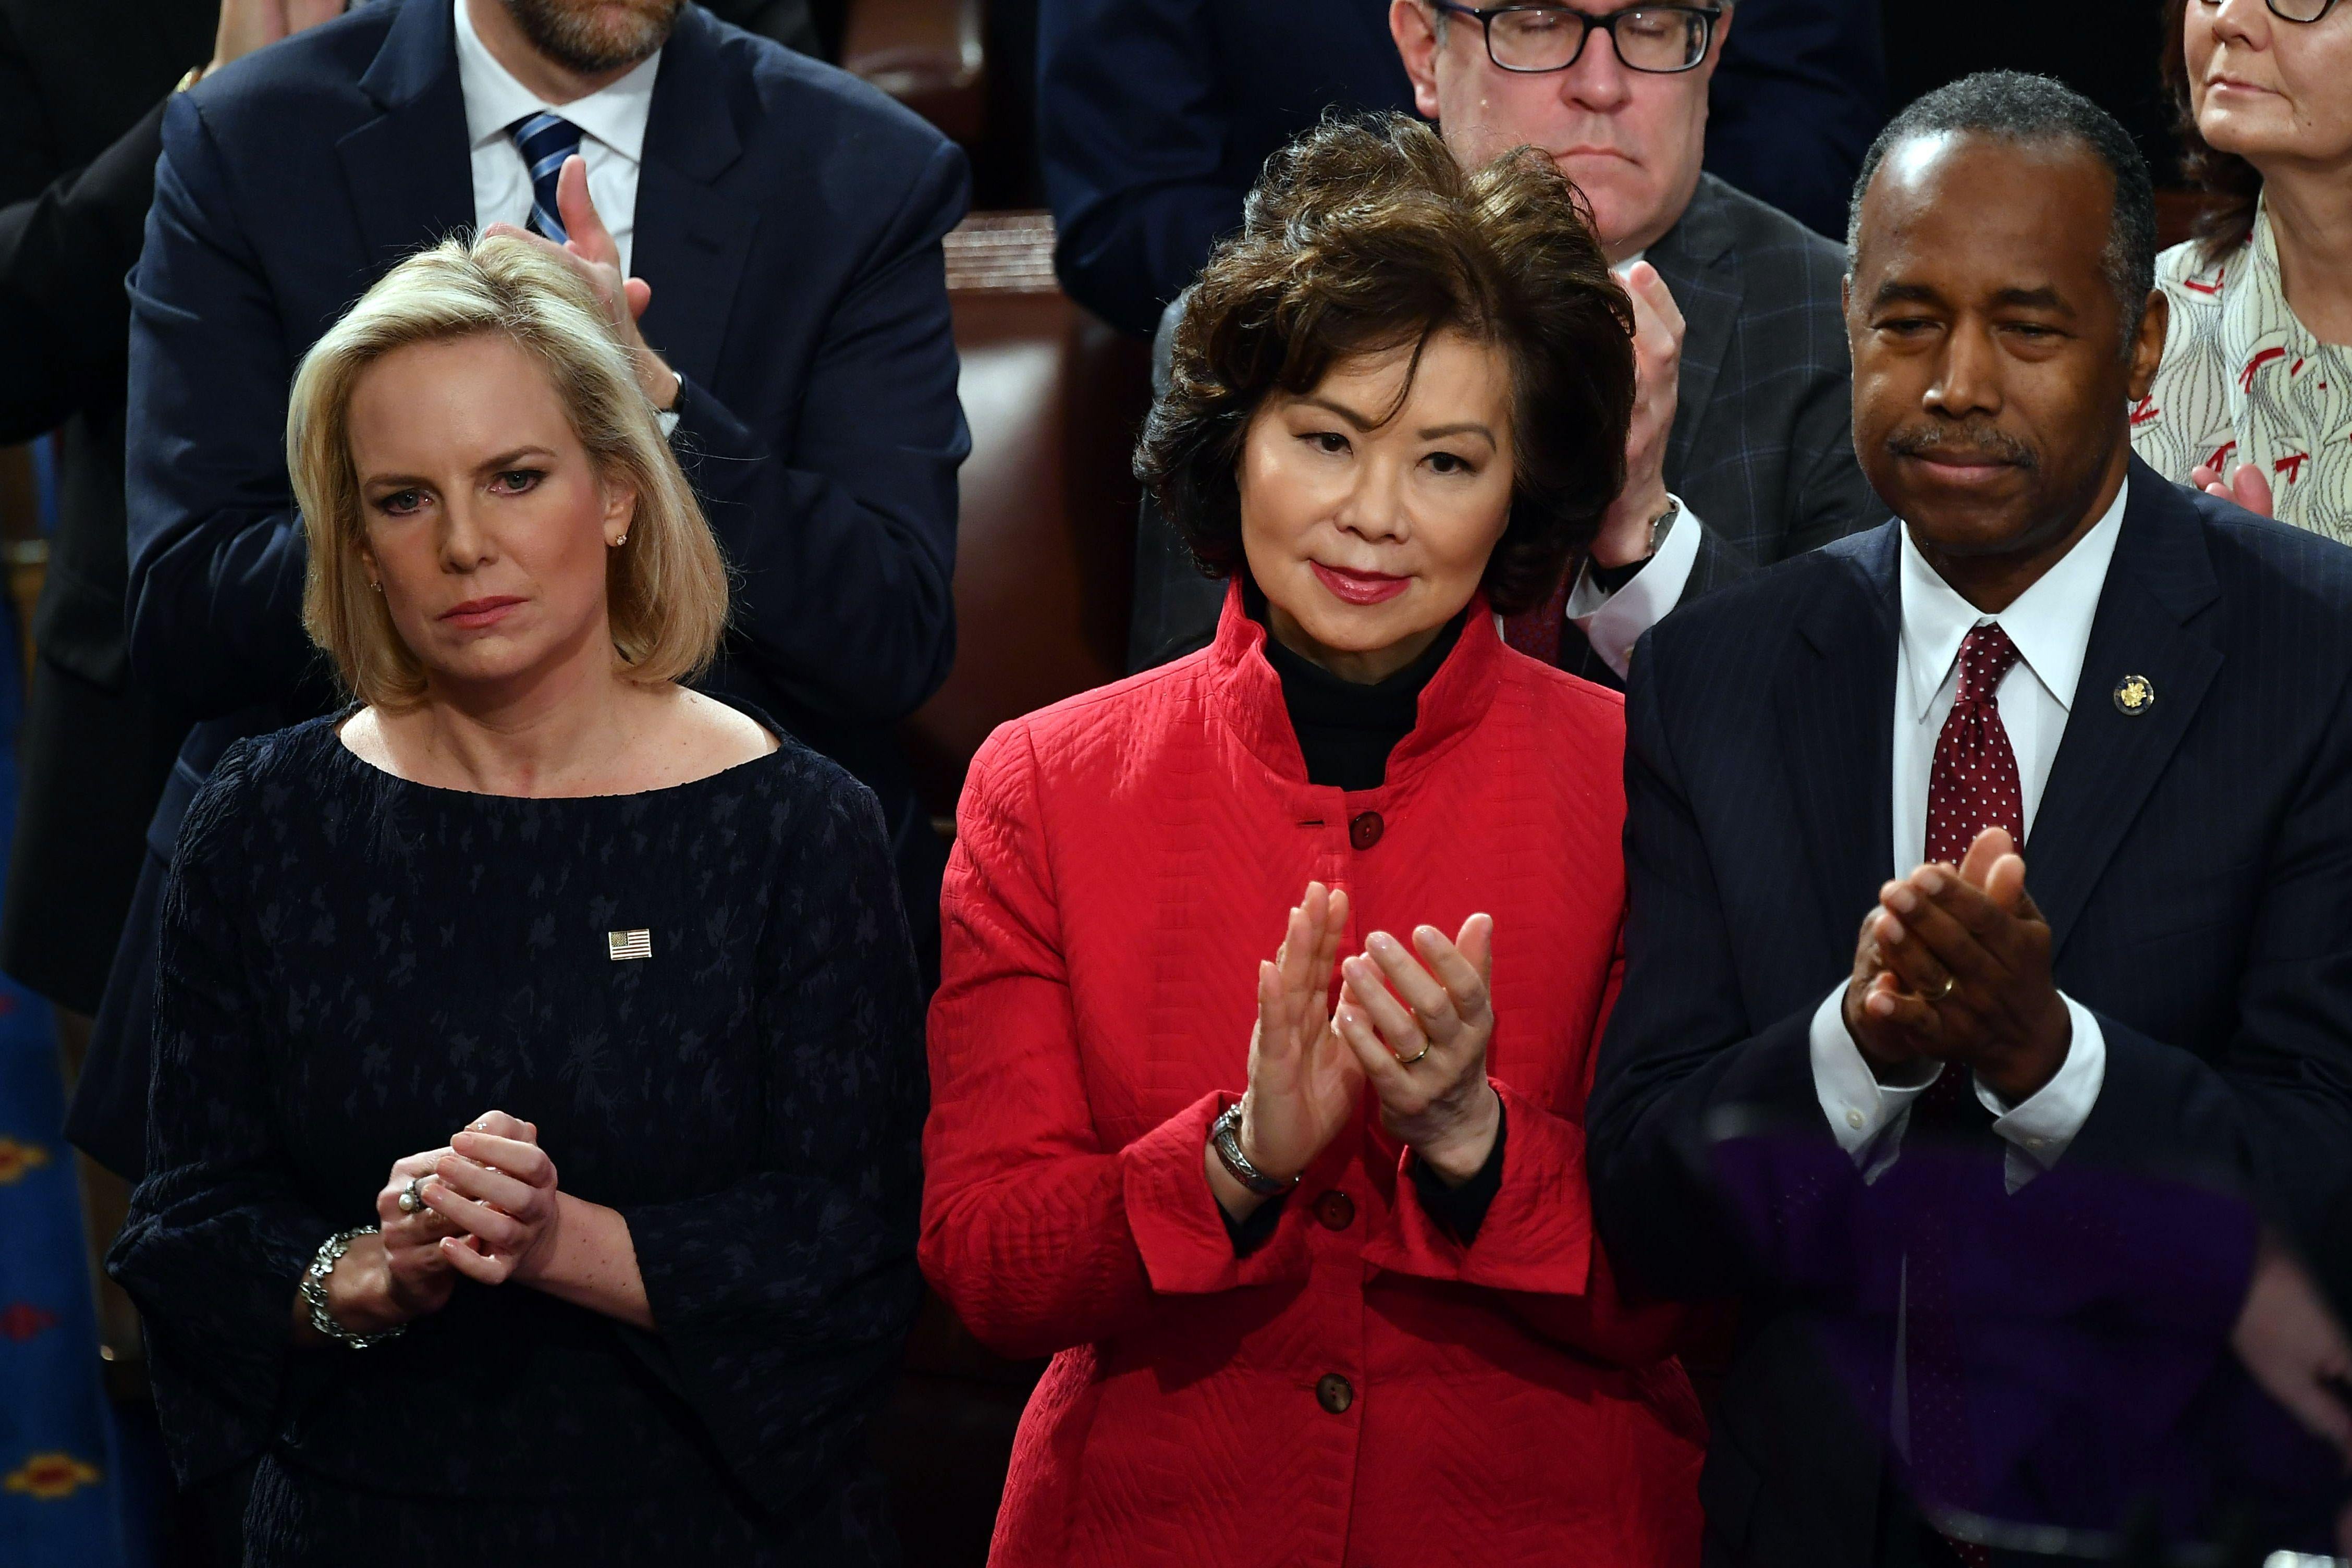 Transportation Secretary Elaine Chao at the State of the Union address on Feb. 5, 2019. 